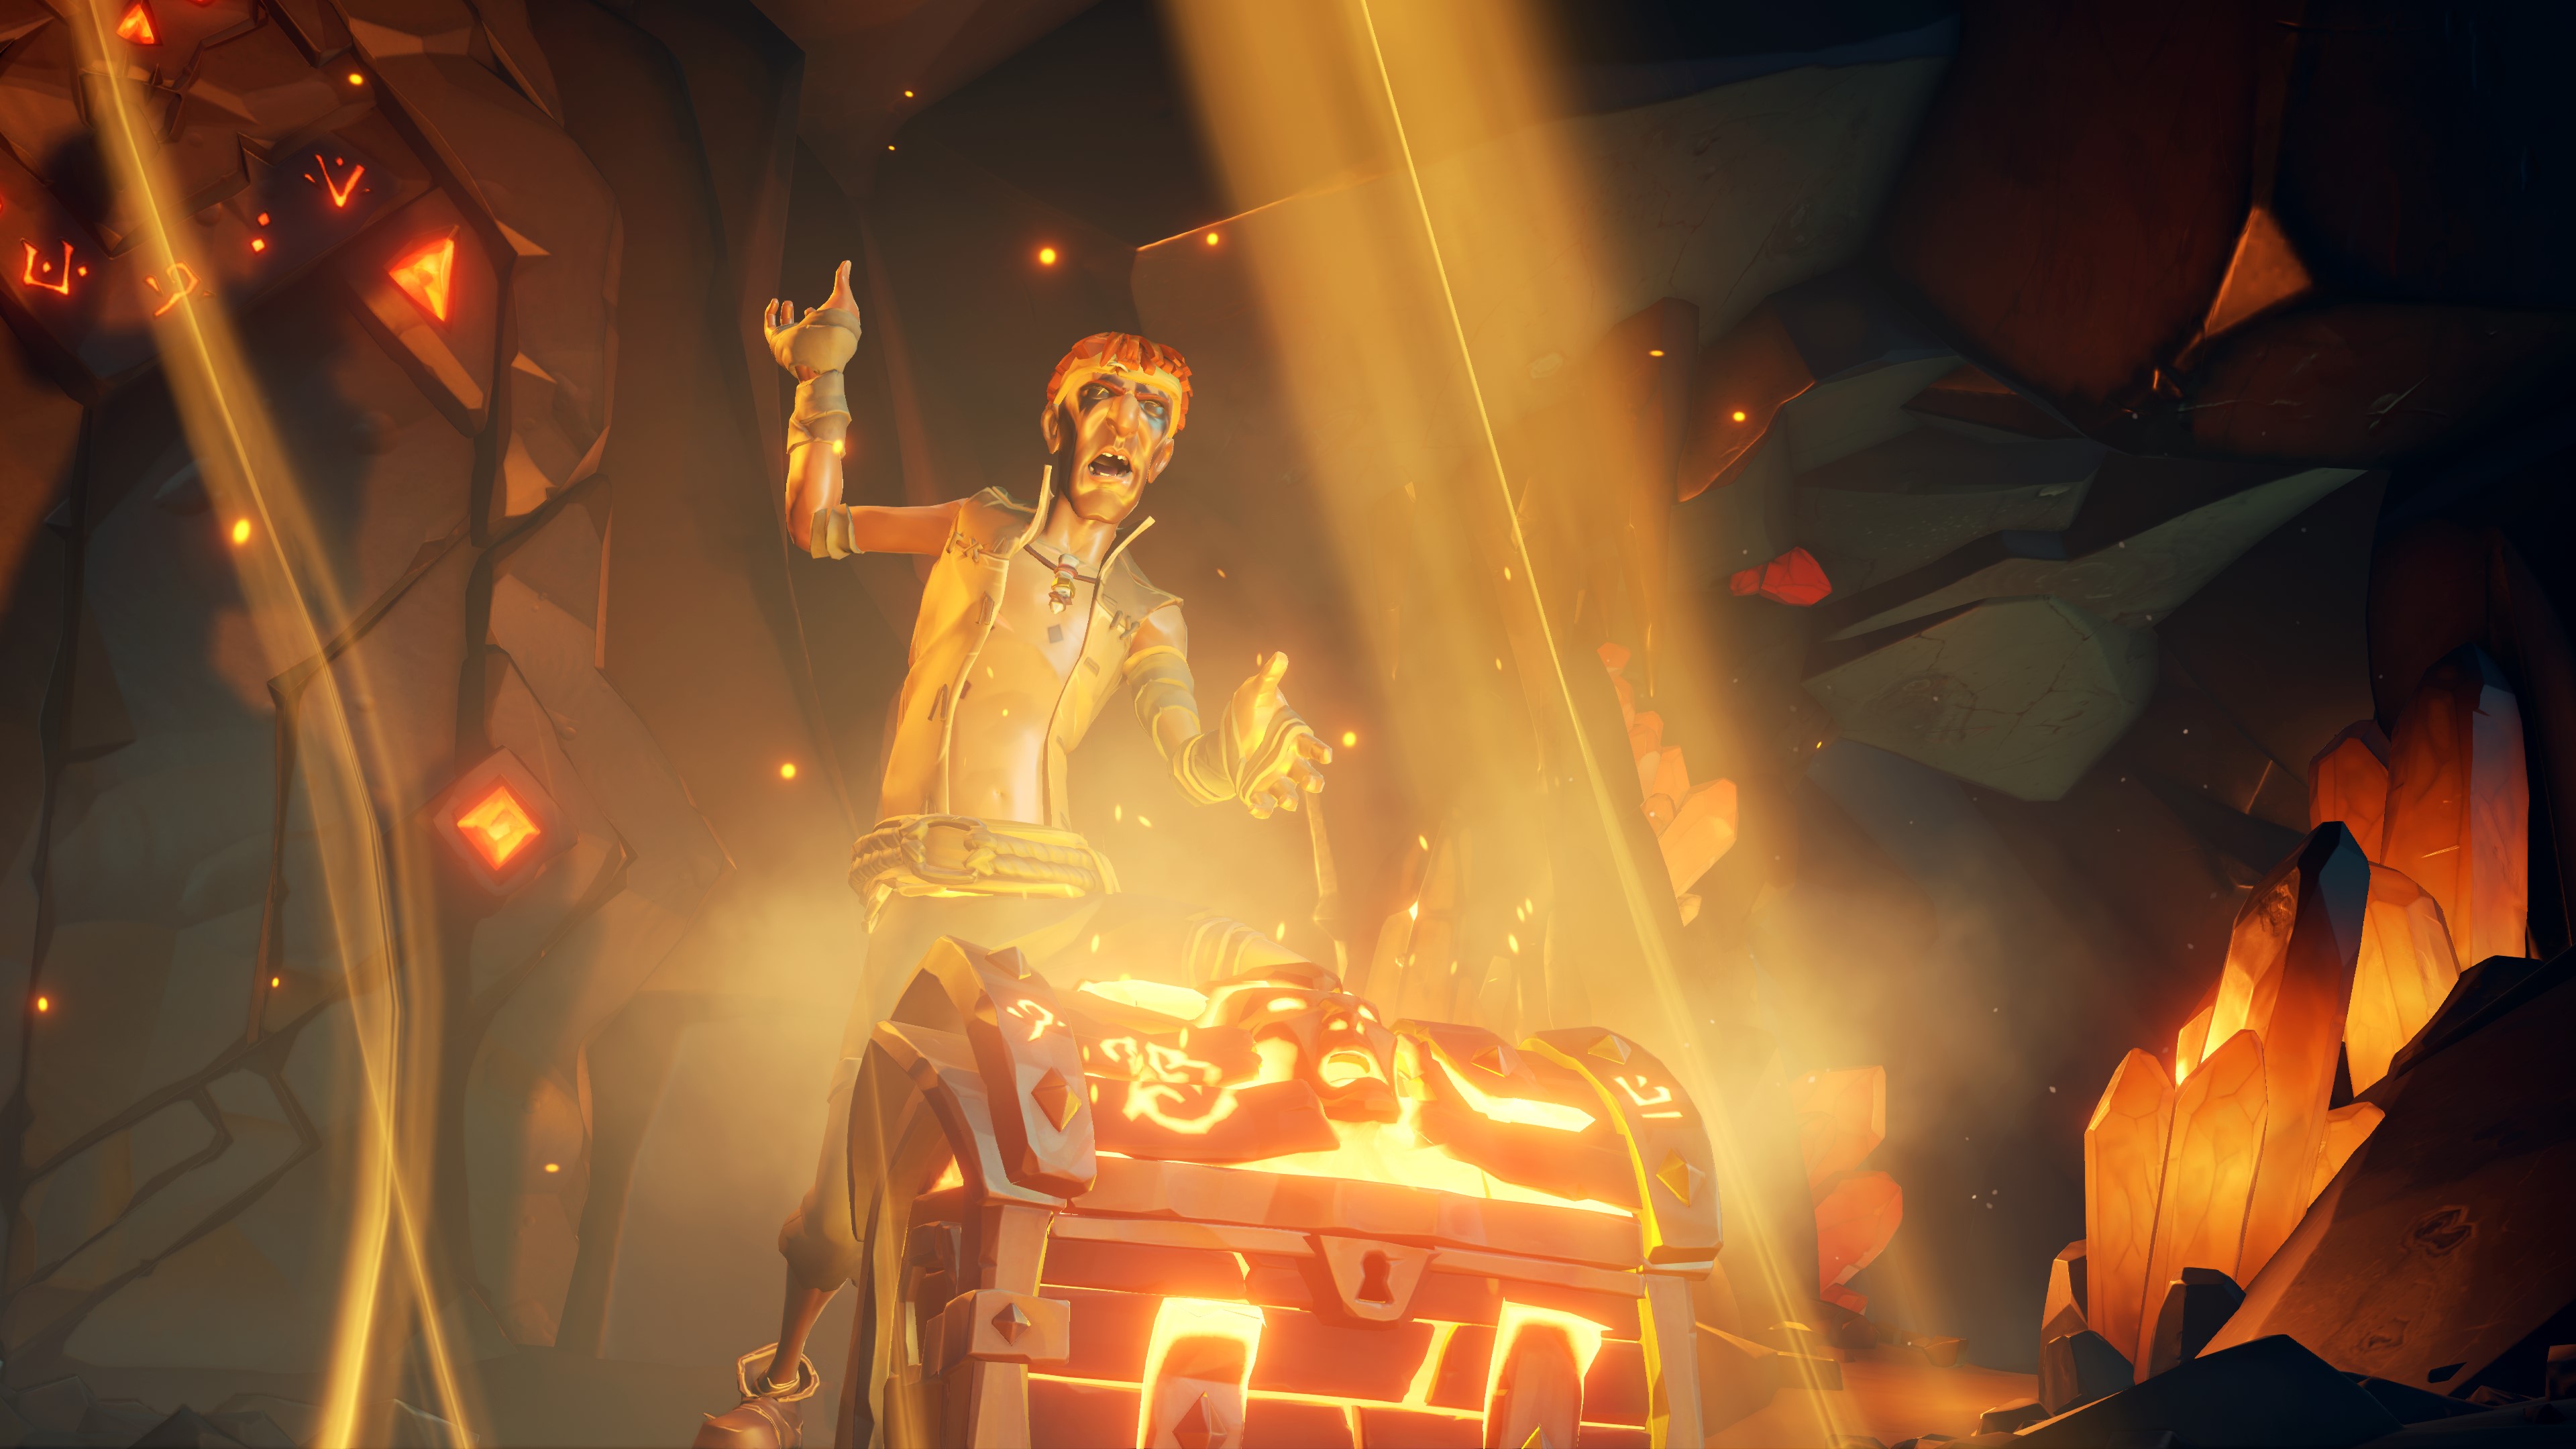 Sea of Thieves’ Free Heart of Fire Update Available Now Adding Tall Tale and New Weaponry